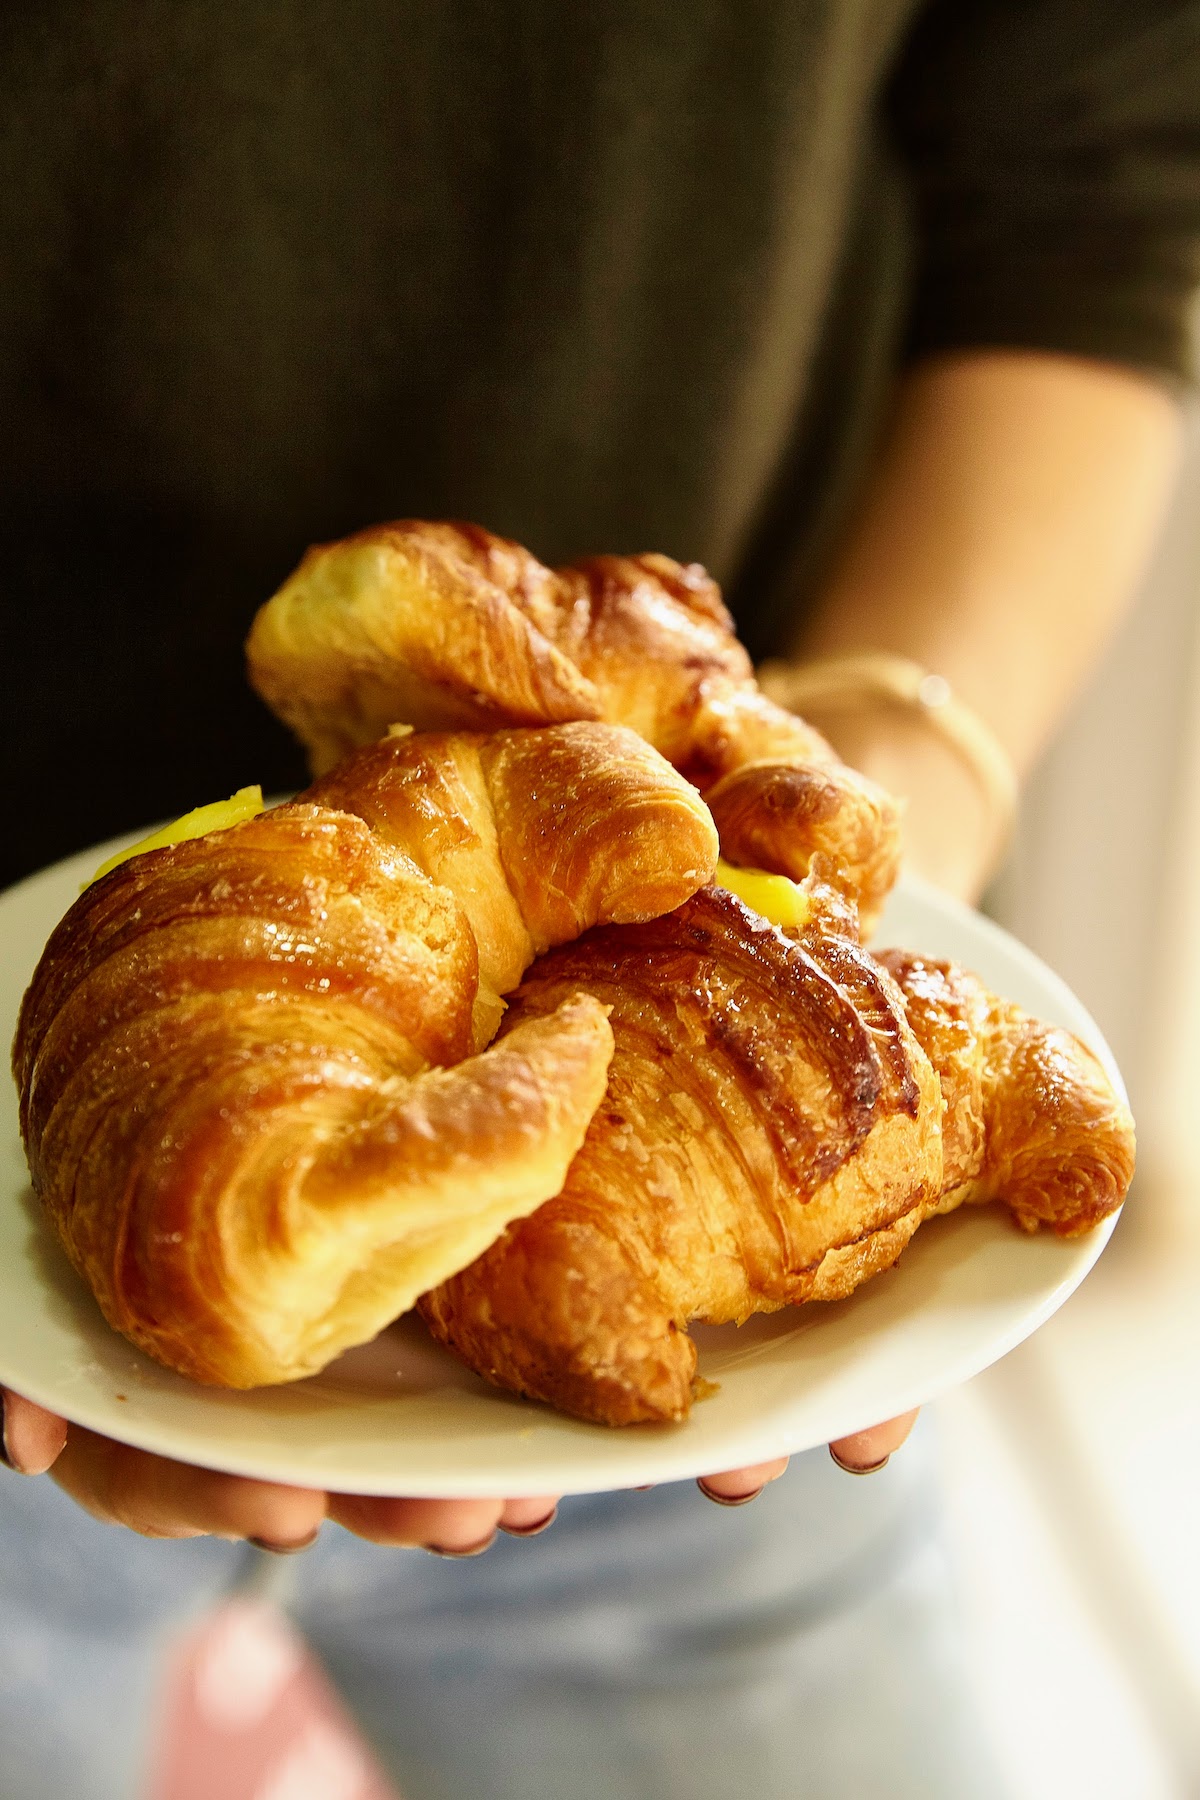 Three Italian-style croissants on a white plate in a person's hand